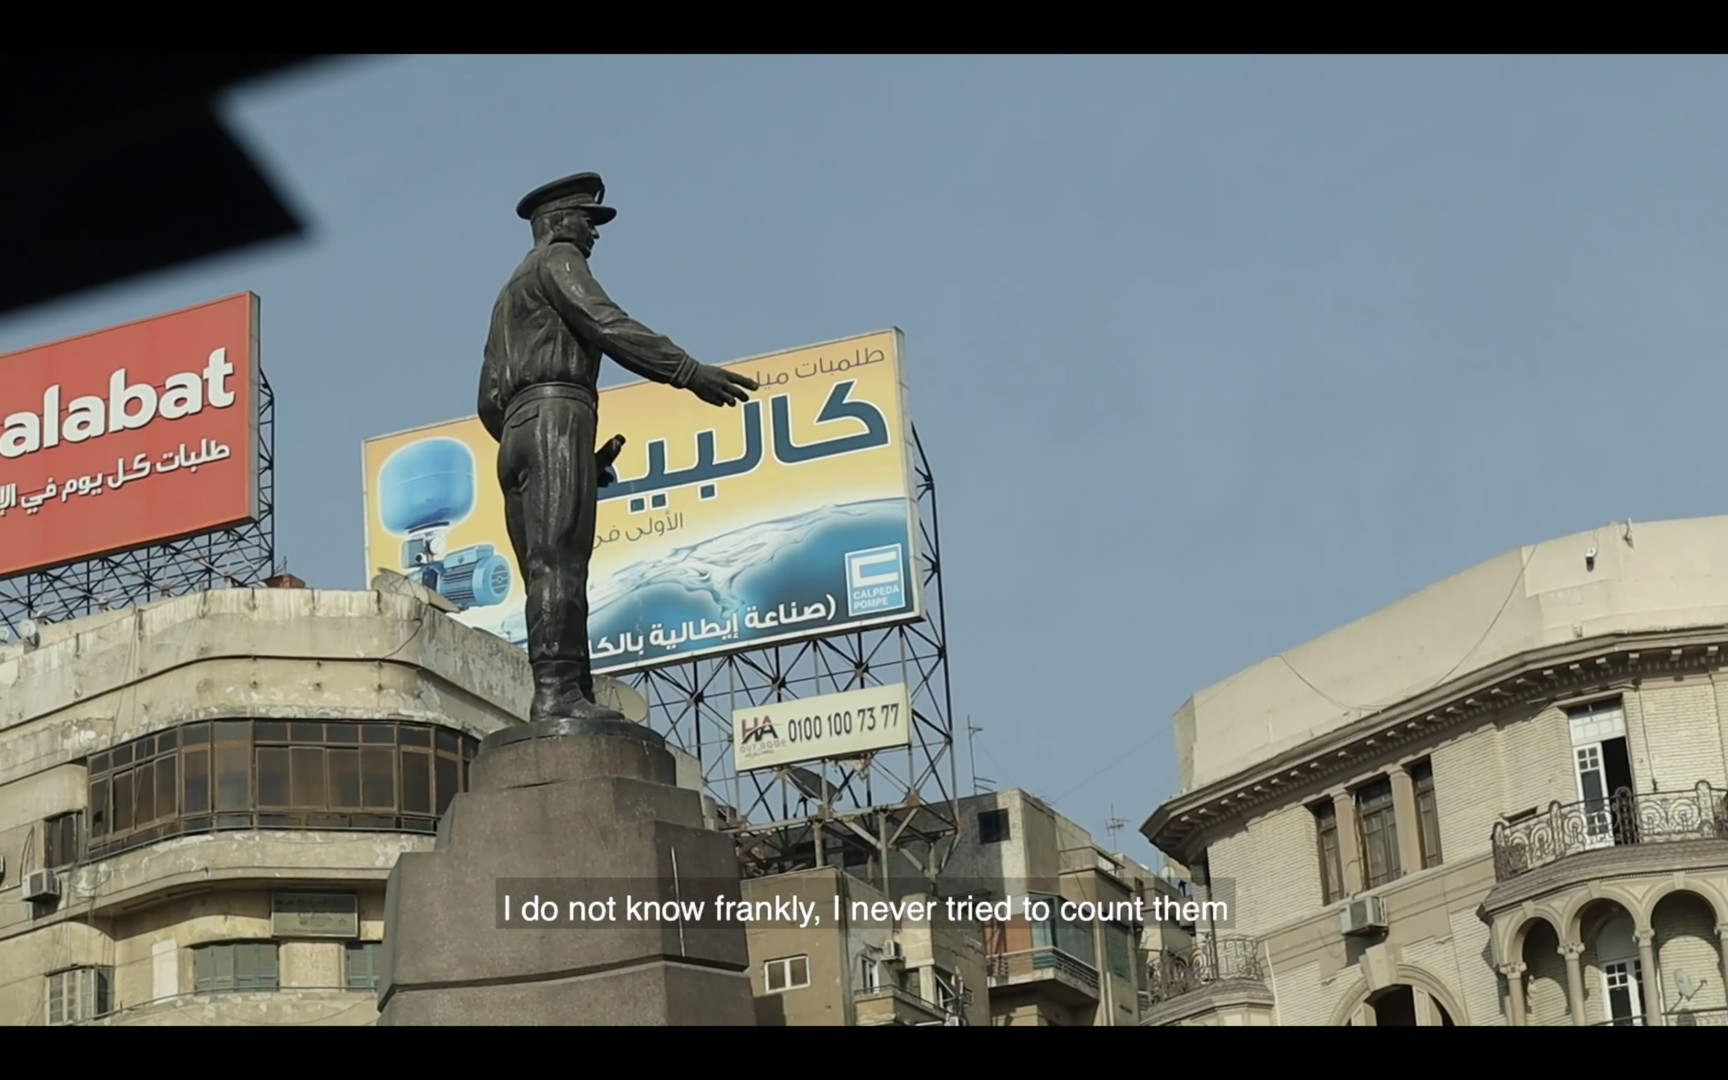 A screenshot of the film "Way Home". The shot shows a statue in the center of a square with buildings and billboards behind it. Caption at the bottom read "I do not know frankly, I never tried to count them."